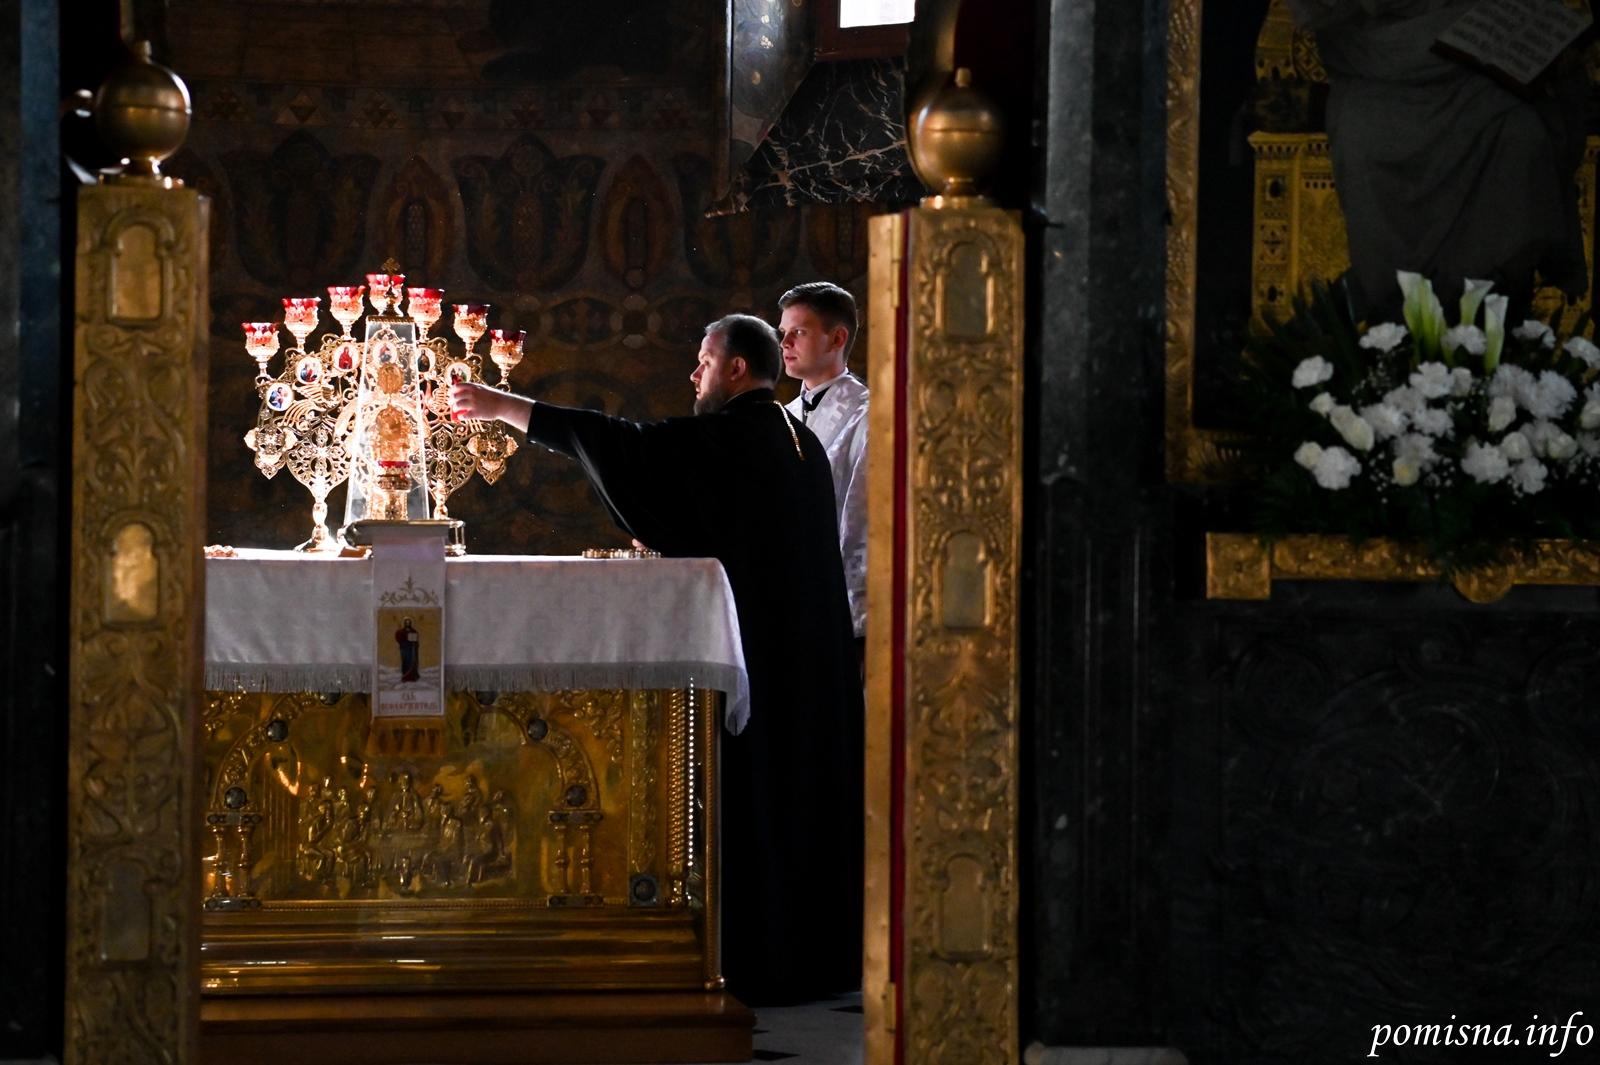 In snub to Russia, Ukraine’s Orthodox Church moves Christmas to Dec. 25